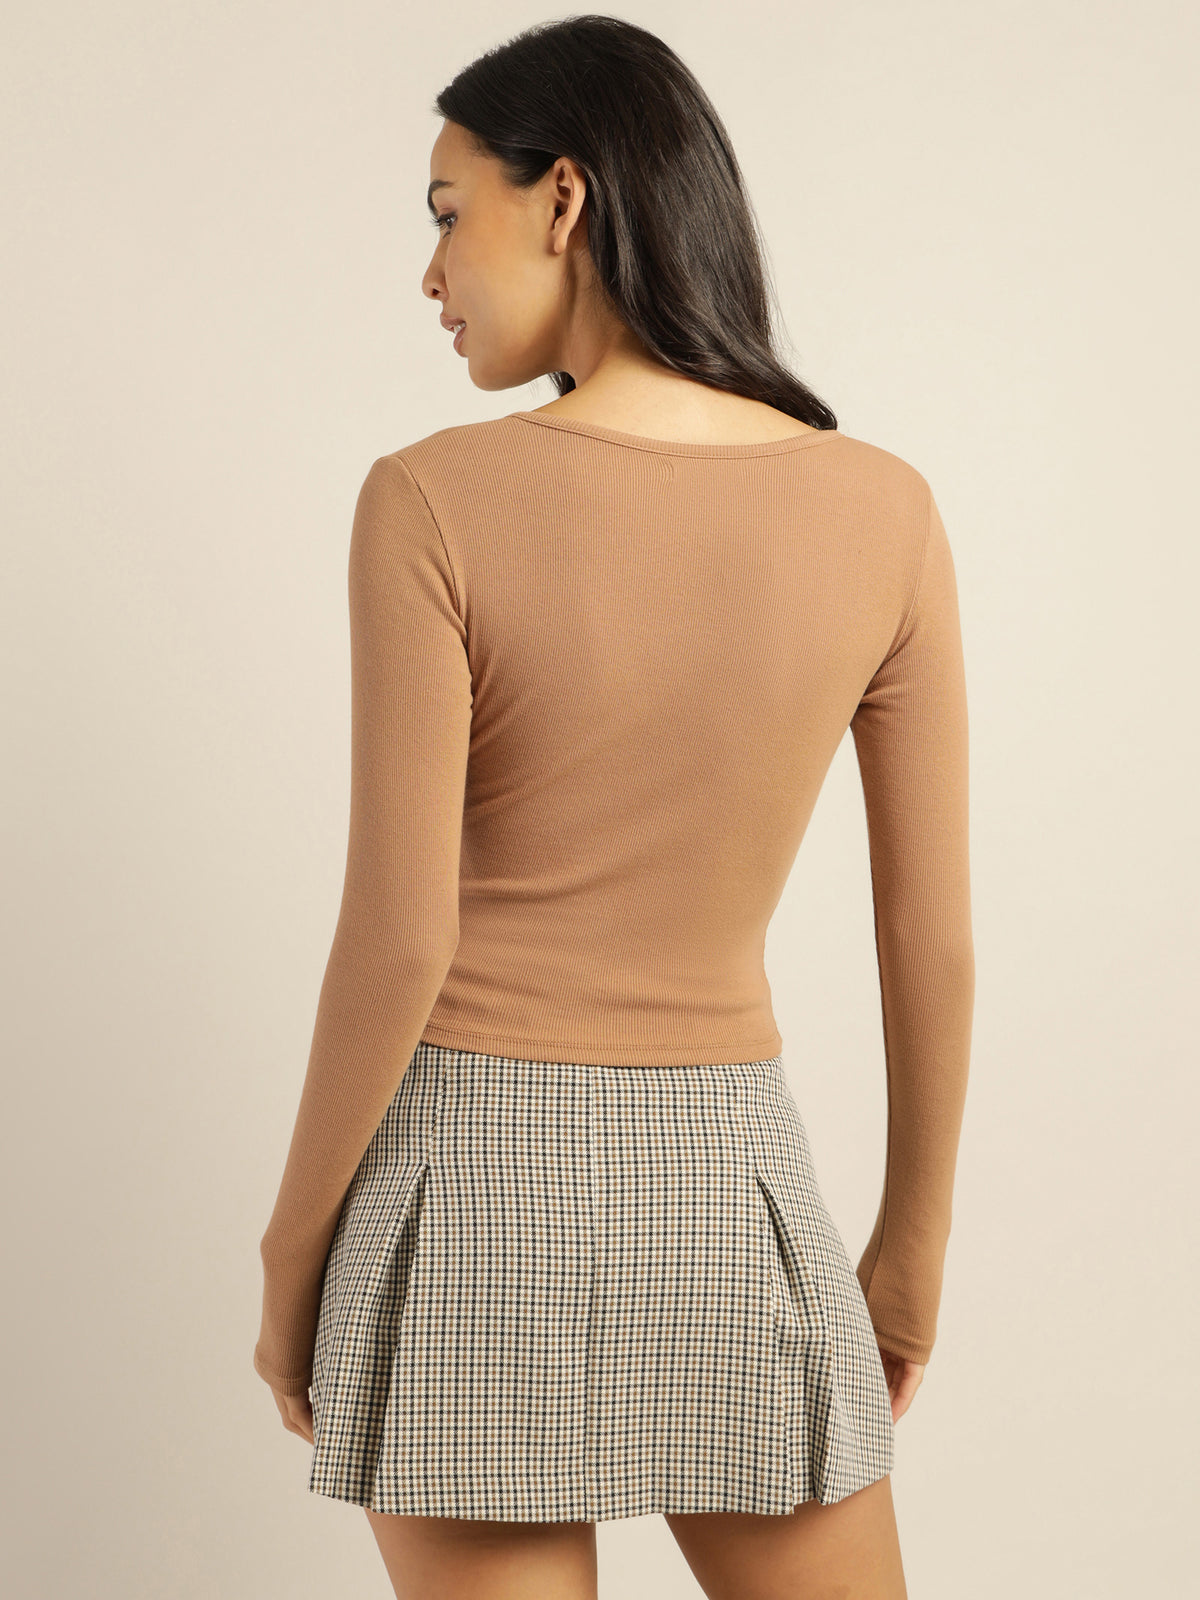 Tina Notch Front Long Sleeve T-Shirt in Toffee